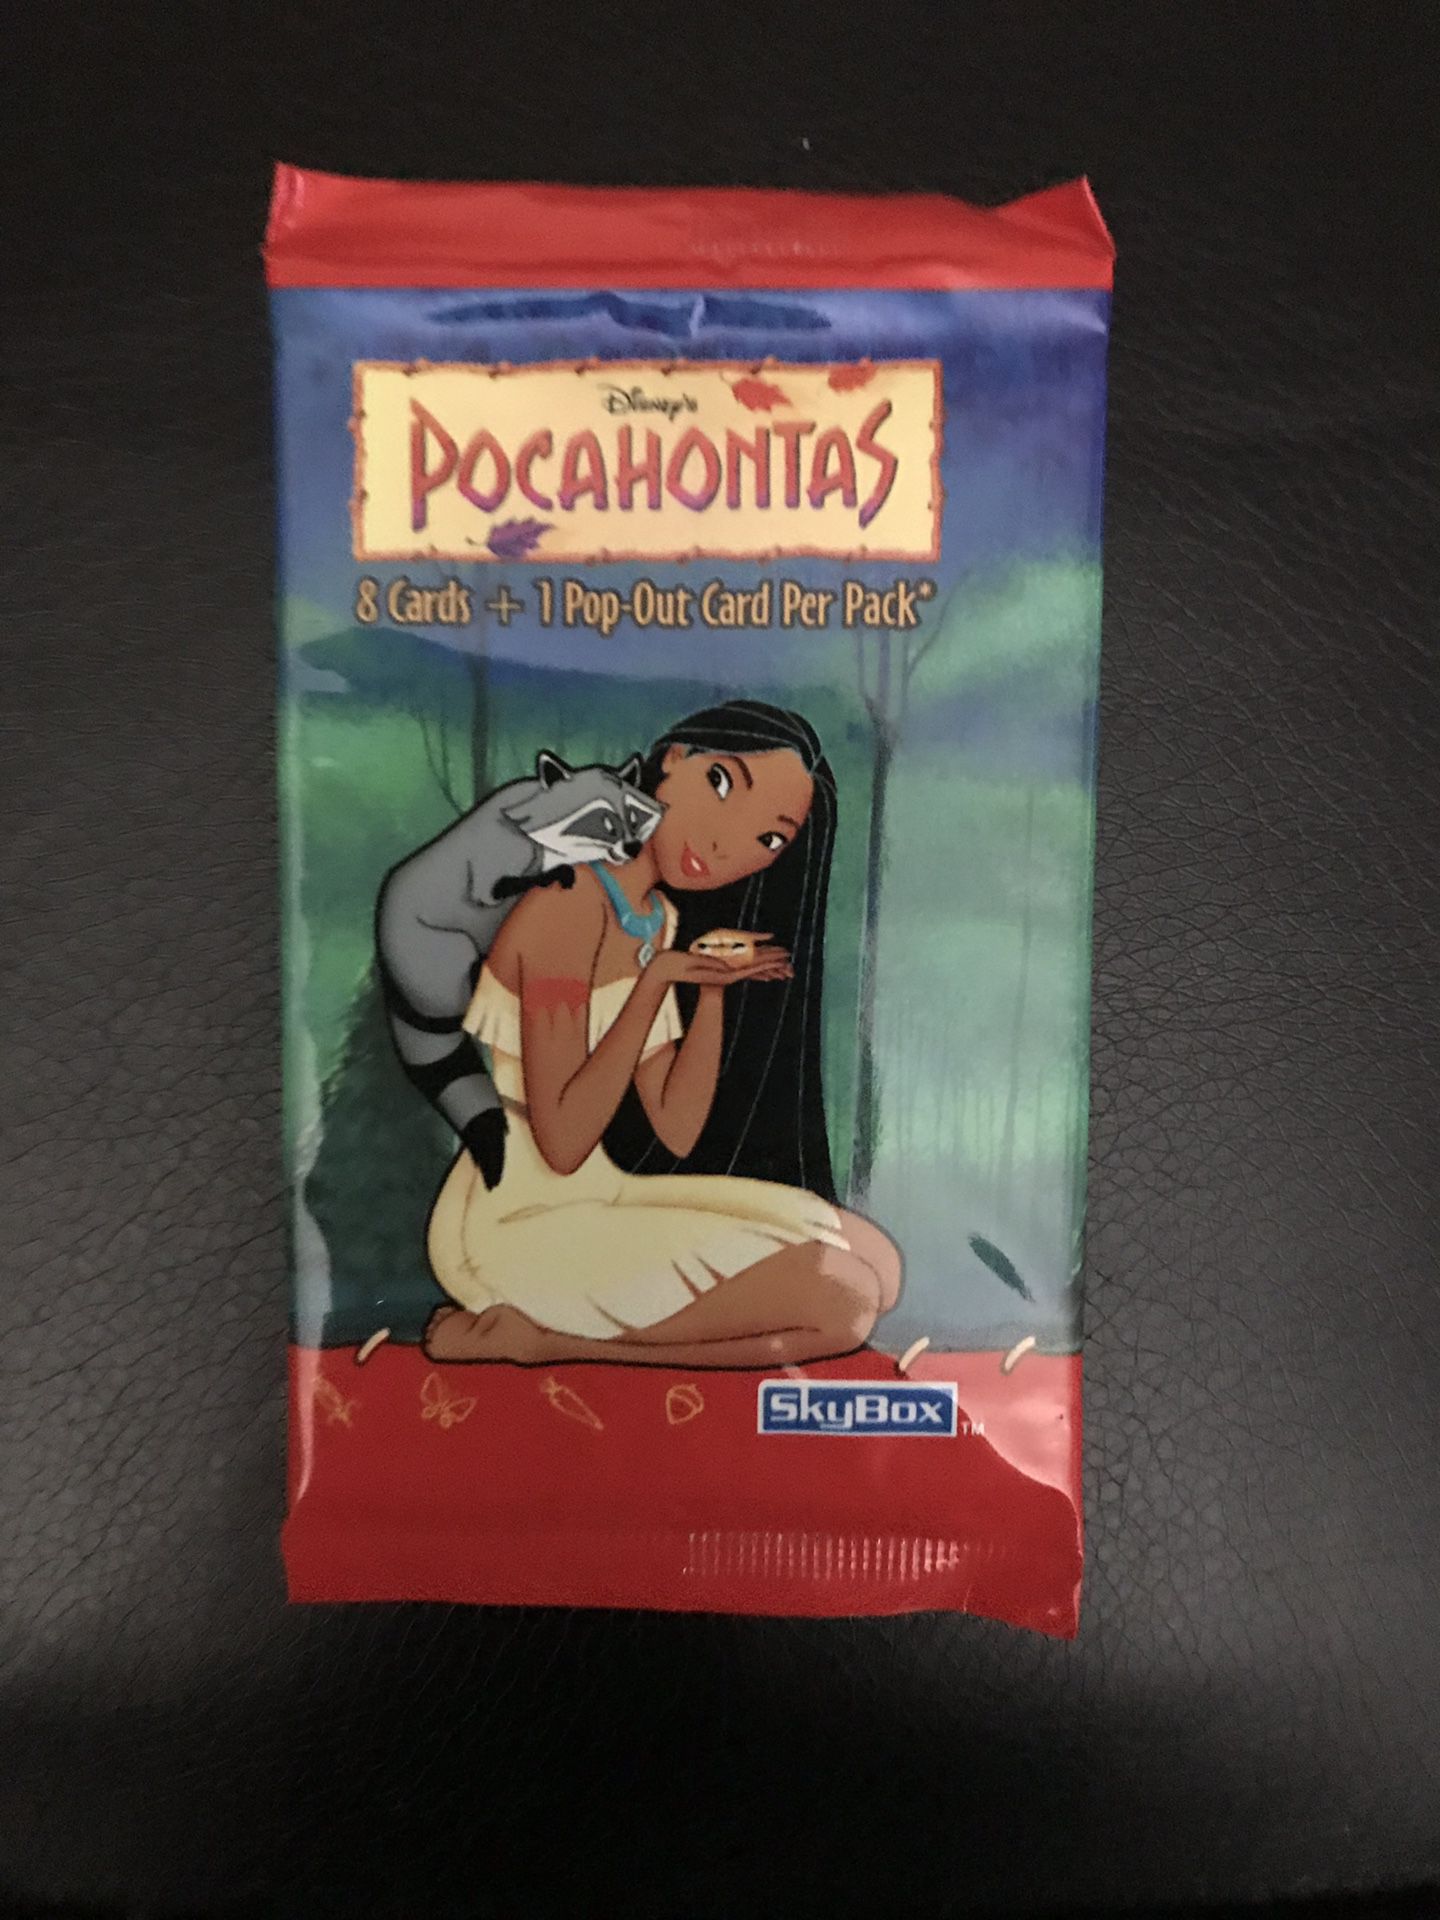 3- Brand-New Unopened Packs Of Pocahontas Skybox Cards